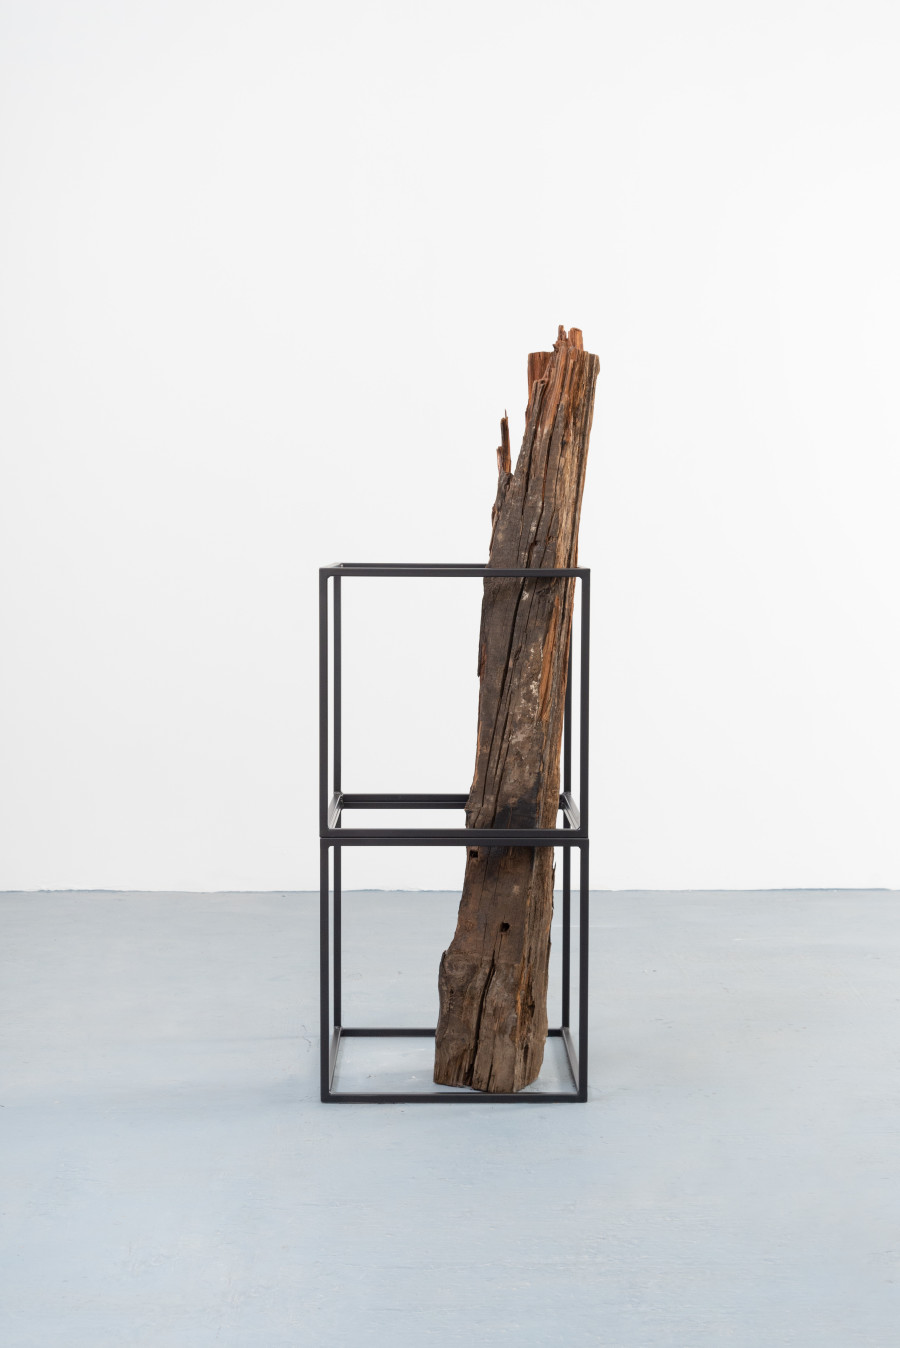 Jose Dávila, Collaborating together despite our differences, 2022, Metal and wood, 175 x 63 x 60 cm. Photo: Agustín Arce